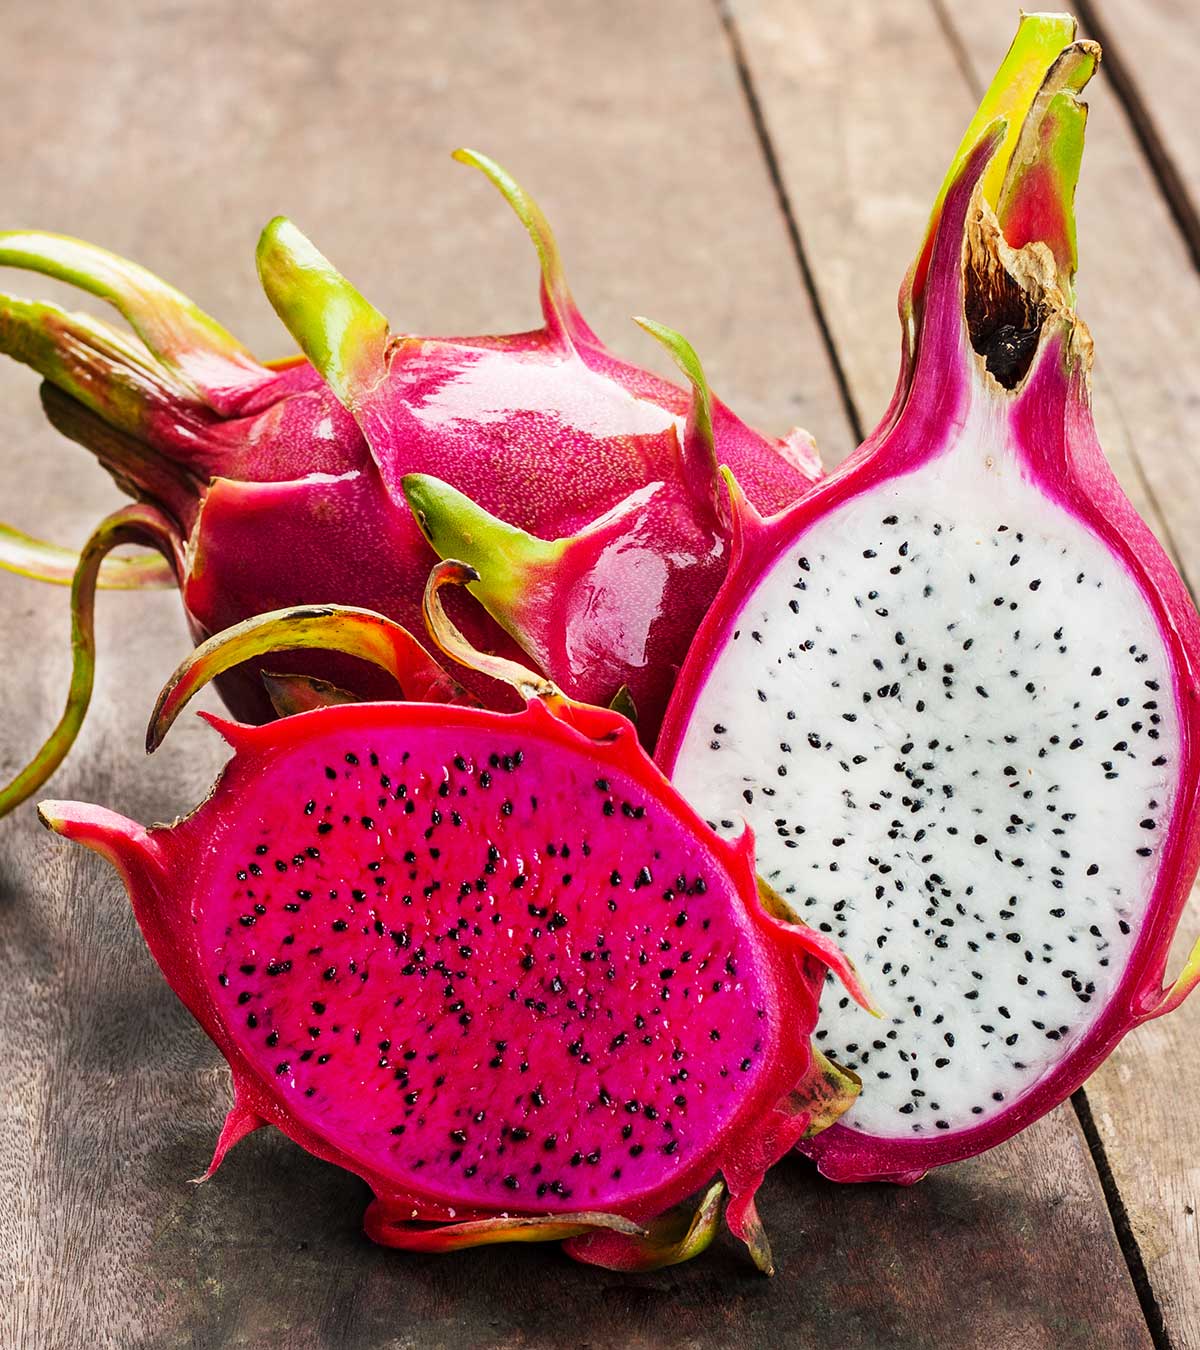 is it safe to eat dragon fruit during pregnancy?